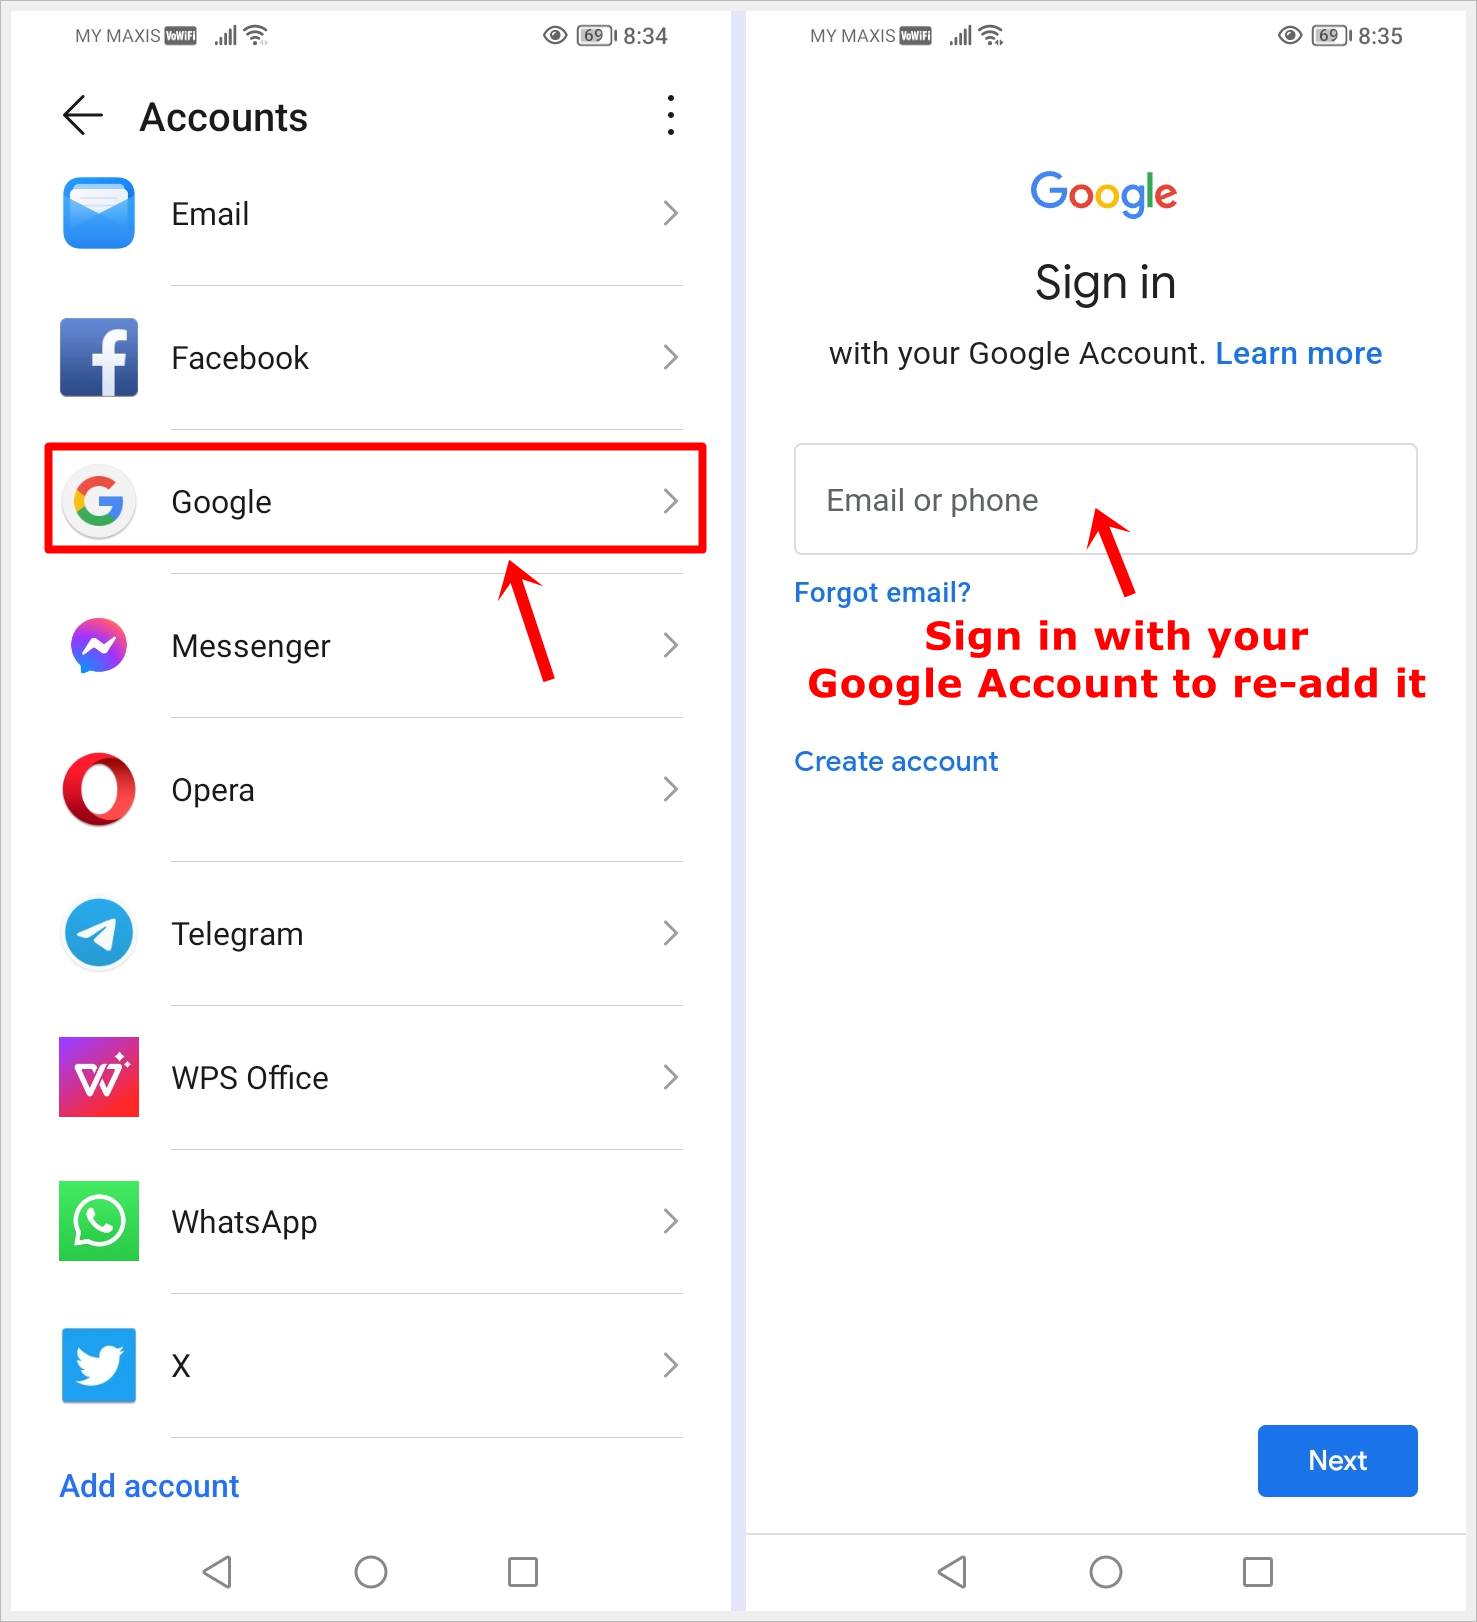 How to Fix "Google Play Services Keeps Stopping" Error: This image displays two screenshots of an Android phone: one featuring the "Accounts" page with the "Google" option highlighted, while the other shows the Google Account sign-in page.